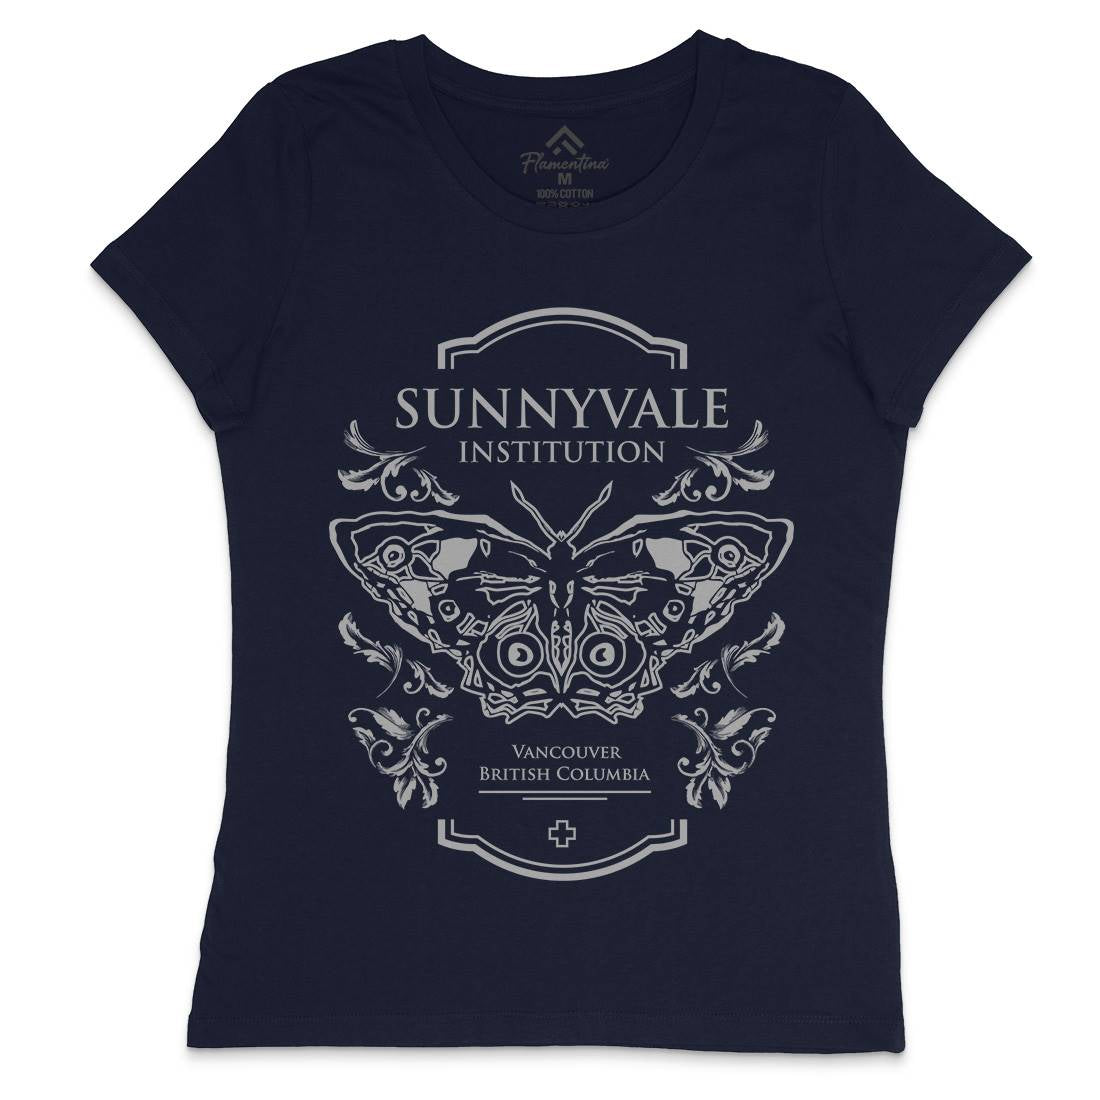 Sunnyvale Institution Womens Crew Neck T-Shirt Space D232